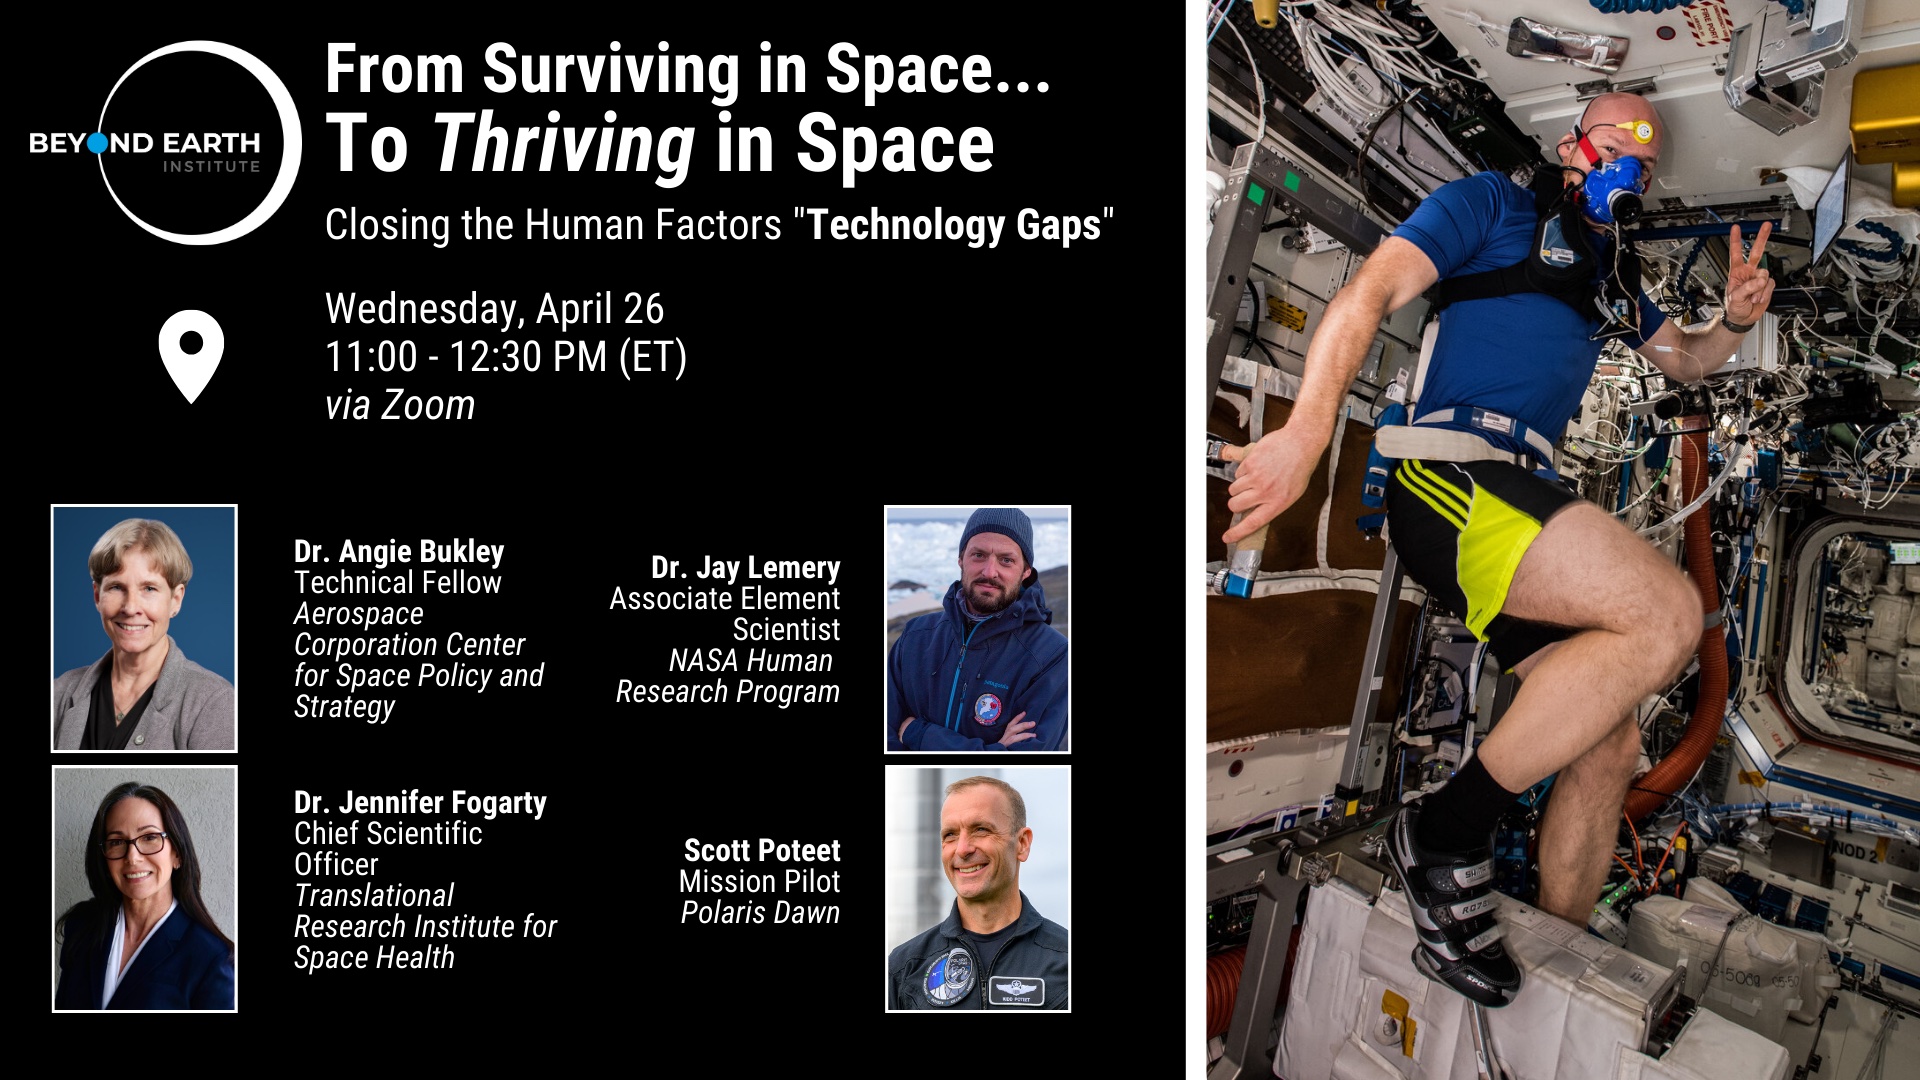 Webinar: From Surviving in Space to Thriving In Space: Closing the Human Factors “Technology Gap”